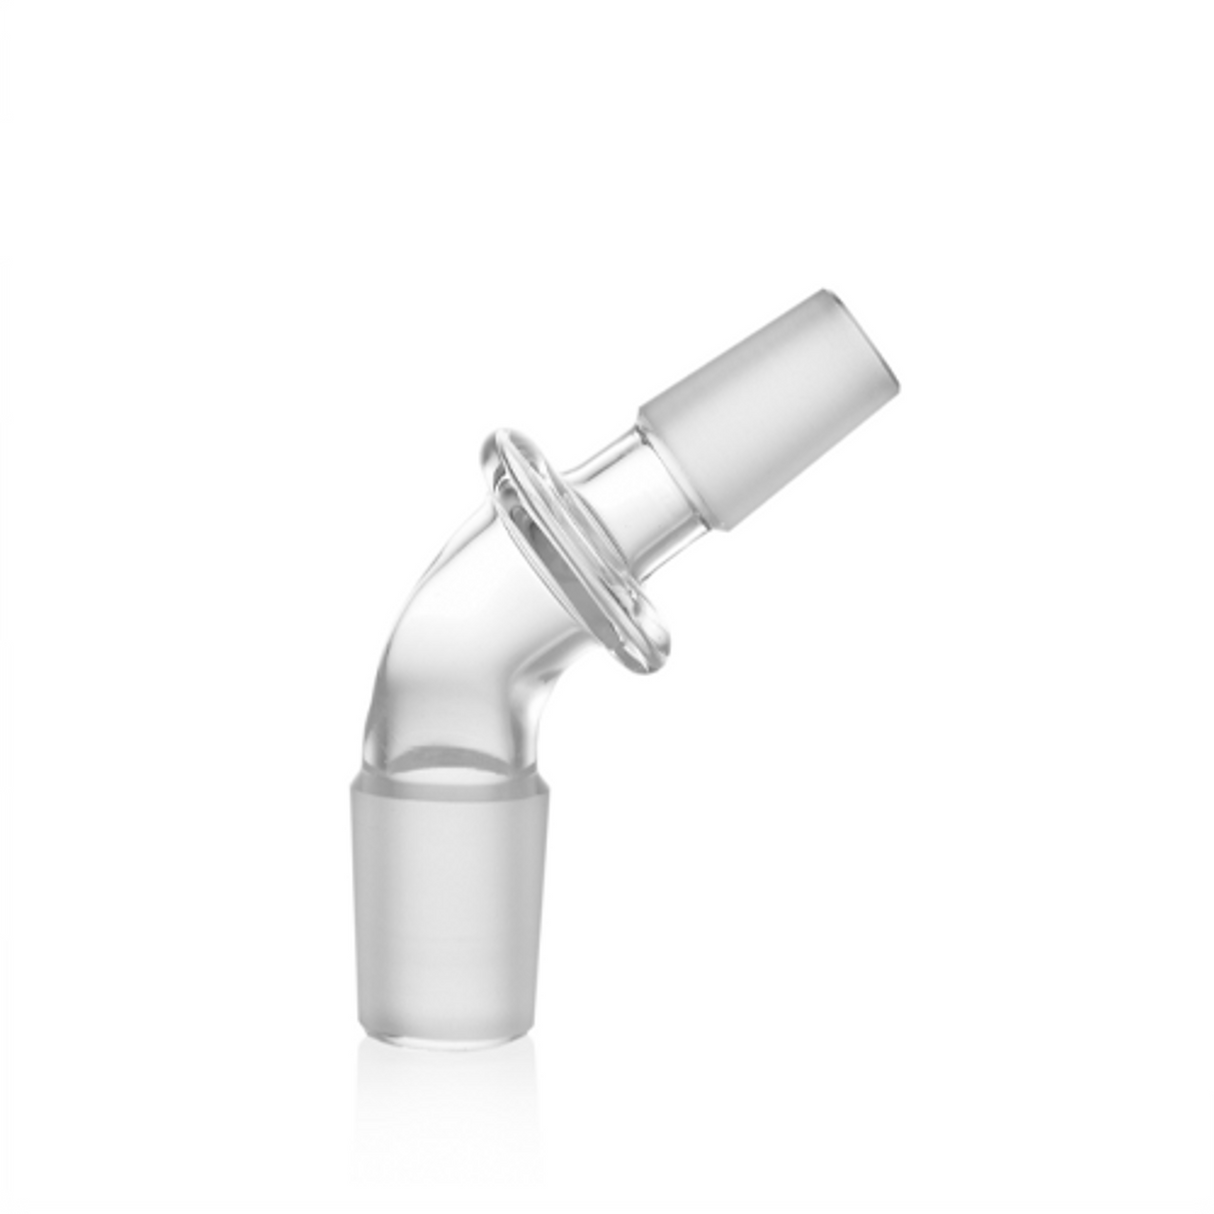 Grav Labs 19mm to 14mm Female Reduction Adaptor, clear glass, angled side view